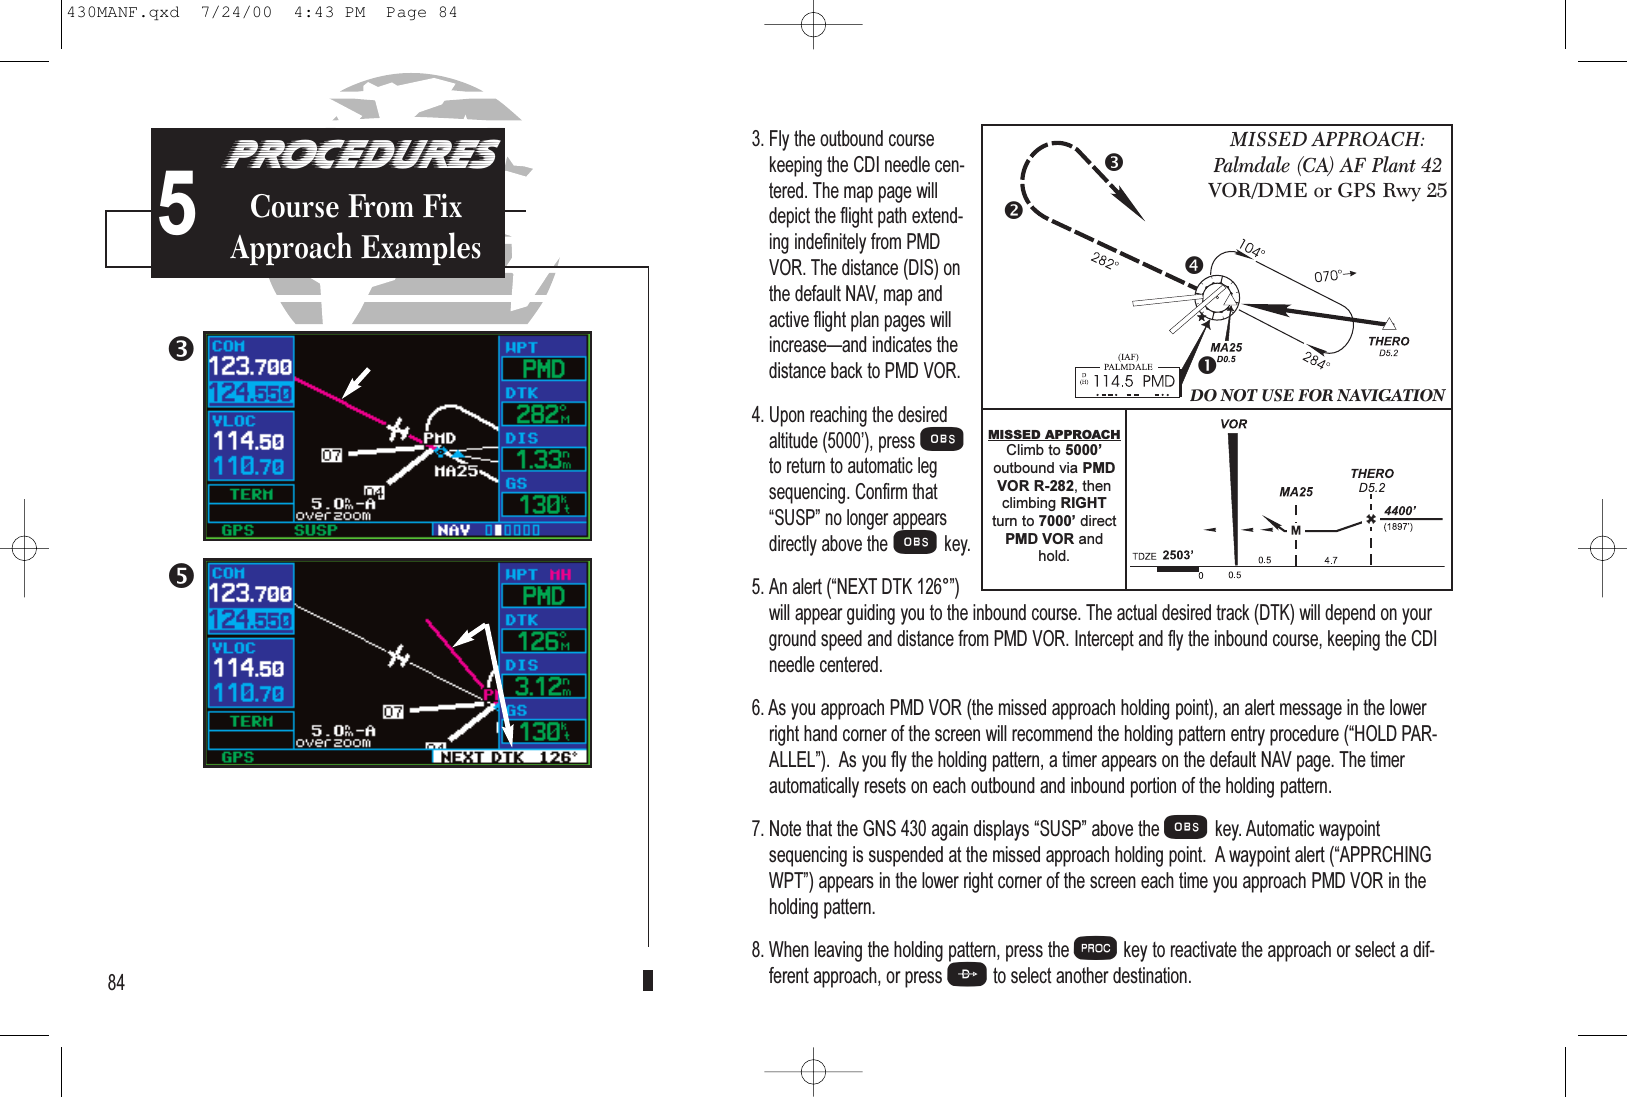 3. Fly the outbound coursekeeping the CDI needle cen-tered. The map page willdepict the flight path extend-ing indefinitely from PMDVOR. The distance (DIS) onthe default NAV, map andactive flight plan pages willincreaseand indicates thedistance back to PMD VOR.4. Upon reaching the desiredaltitude (5000), pressOto return to automatic legsequencing. Confirm thatSUSP no longer appearsdirectly above theOkey.5. An alert (NEXT DTK 126°)will appear guiding you to the inbound course. The actual desired track (DTK) will depend on yourground speed and distance from PMD VOR. Intercept and fly the inbound course, keeping the CDIneedle centered.6. As you approach PMD VOR (the missed approach holding point), an alert message in the lowerright hand corner of the screen will recommend the holding pattern entry procedure (HOLD PAR-ALLEL).  As you fly the holding pattern, a timer appears on the default NAV page. The timerautomatically resets on each outbound and inbound portion of the holding pattern.7. Note that the GNS 430 again displays SUSP above the Okey. Automatic waypointsequencing is suspended at the missed approach holding point.  A waypoint alert (APPRCHINGWPT) appears in the lower right corner of the screen each time you approach PMD VOR in theholding pattern.8. When leaving the holding pattern, press the Pkey to reactivate the approach or select a dif-ferent approach, or press Dto select another destination.845MISSED APPROACH:Palmdale (CA) AF Plant 42VOR/DME or GPS Rwy 25DO NOT USE FOR NAVIGATIONMISSED APPROACHClimb to 5000outbound via PMDVOR R-282, thenclimbing RIGHTturn to 7000 directPMD VOR andhold.PROCEDURESCourse From FixApproach Examples430MANF.qxd  7/24/00  4:43 PM  Page 84